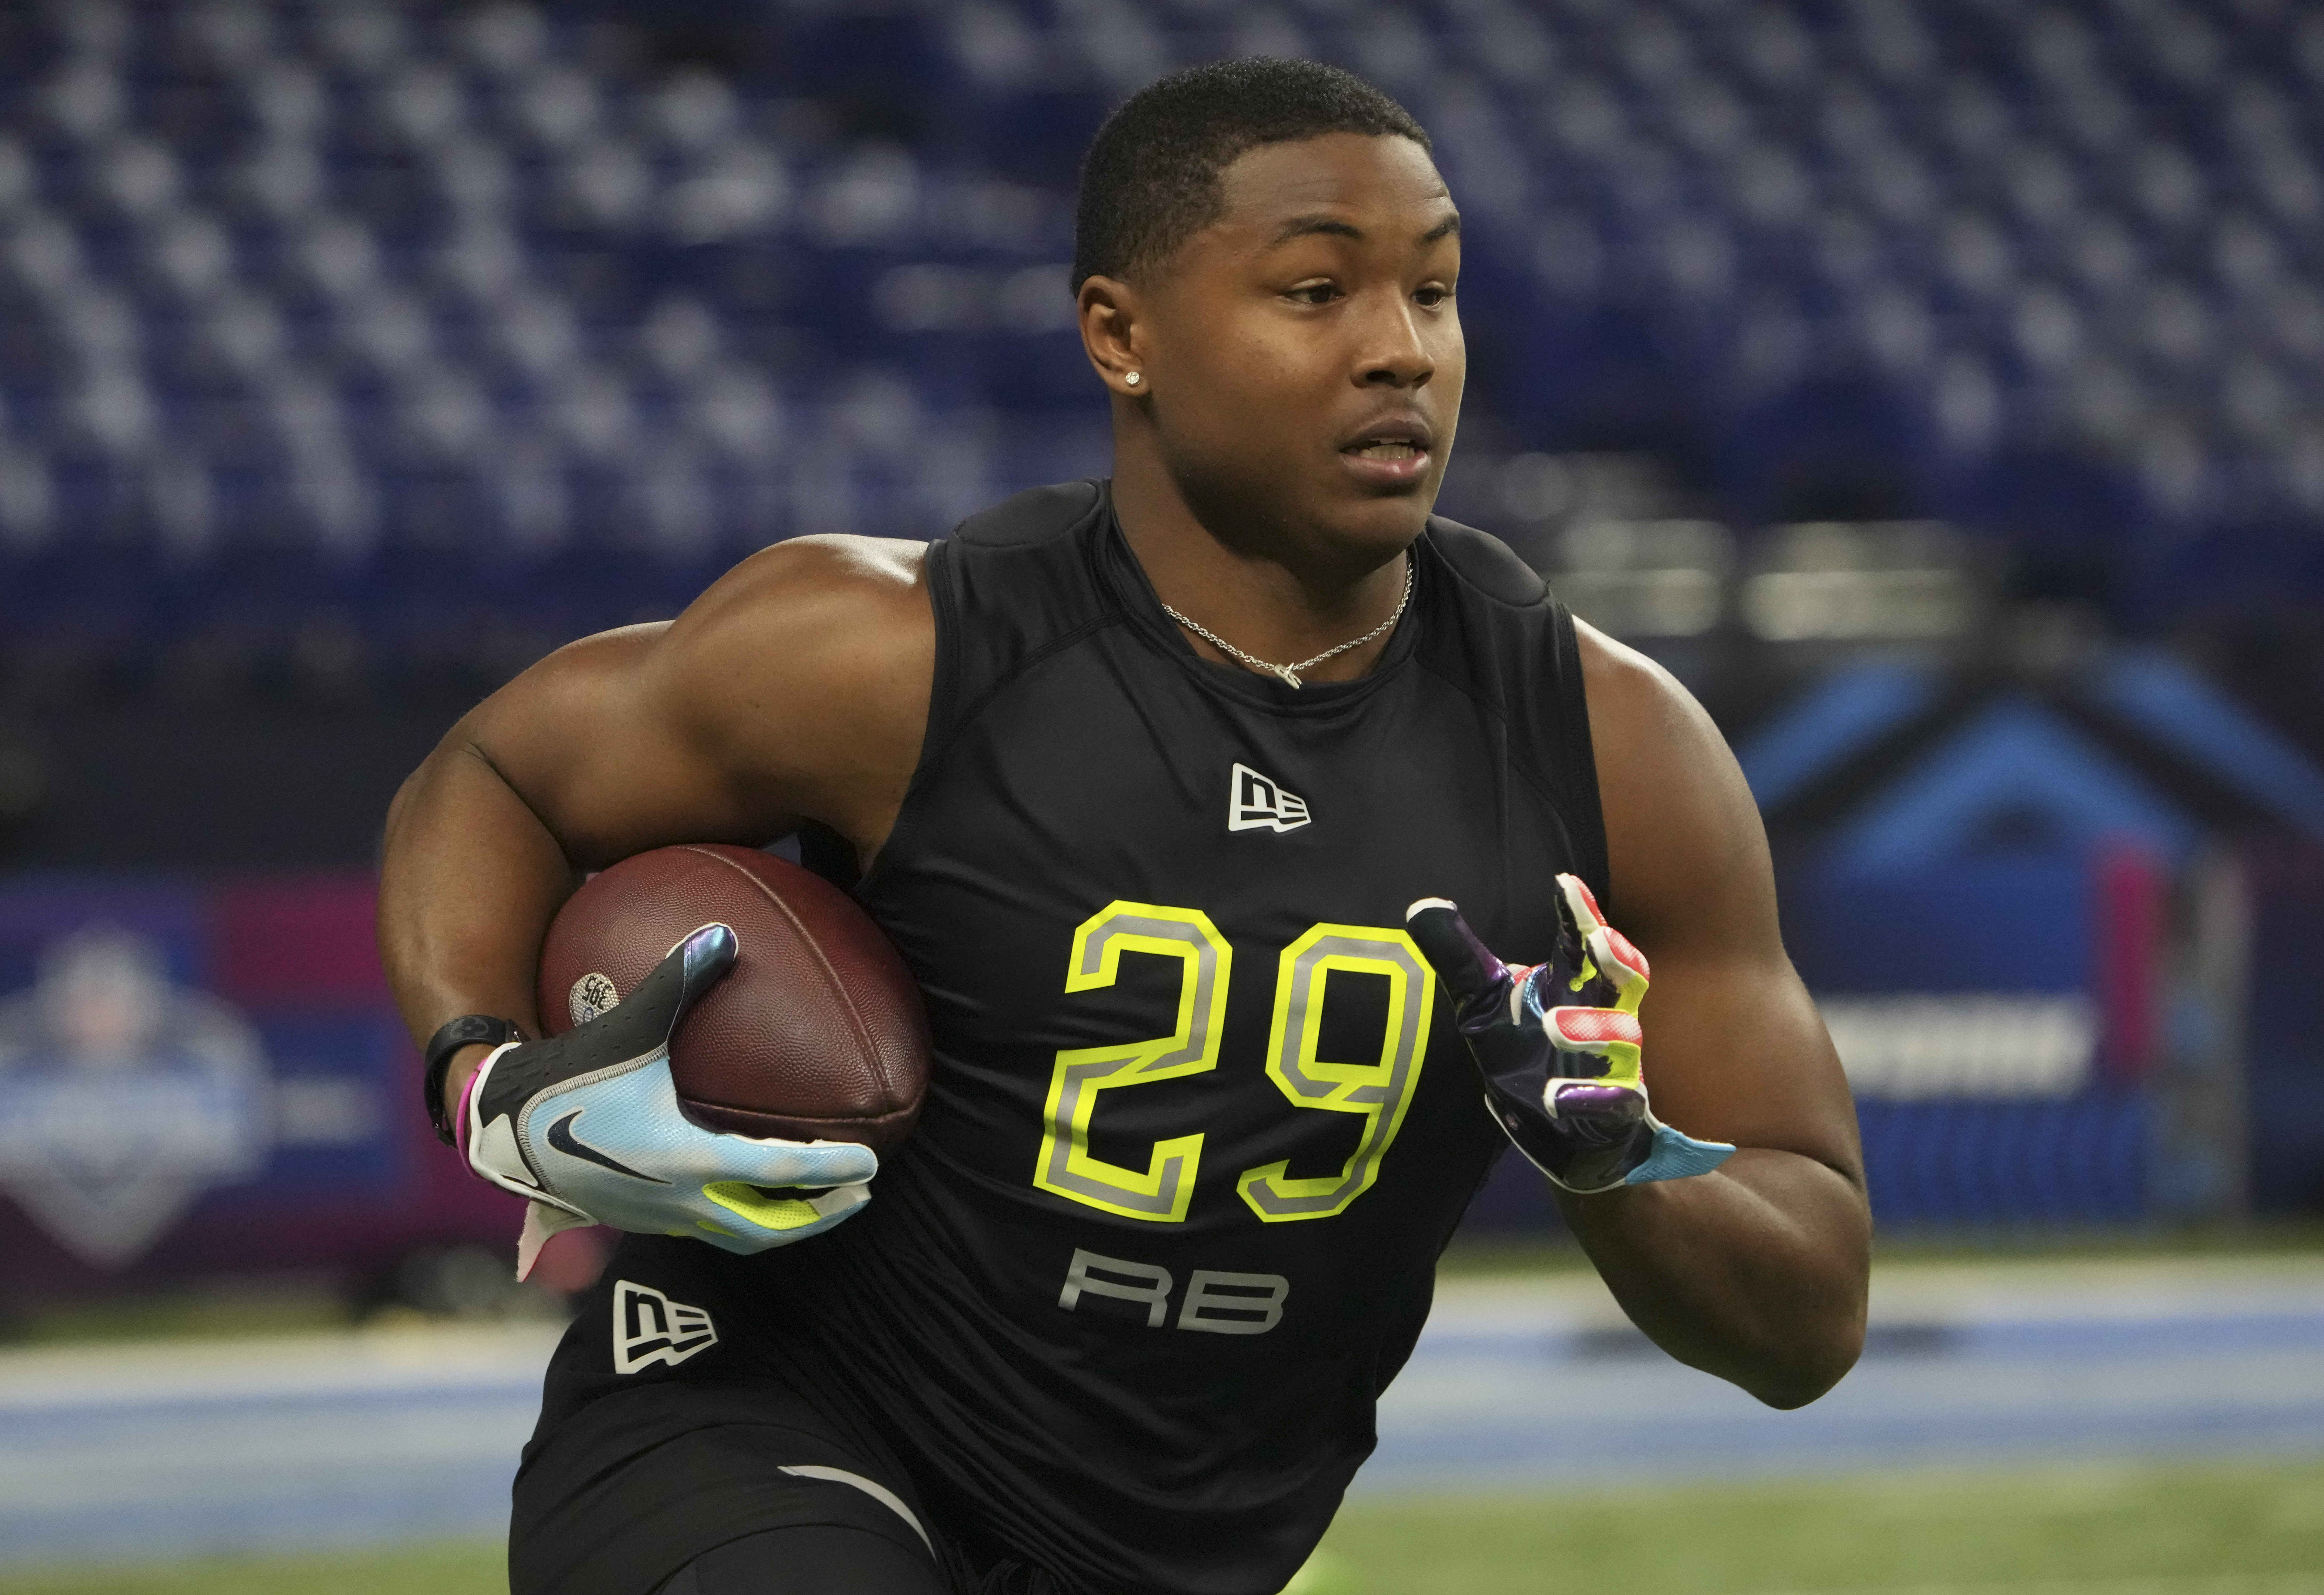 Mar 4, 2022; Indianapolis, IN, USA; Texas A&M running back Isaiah Spiller (RB29) goes through drills during the 2022 NFL Scouting Combine at Lucas Oil Stadium. Mandatory Credit: Kirby Lee-USA TODAY Sports